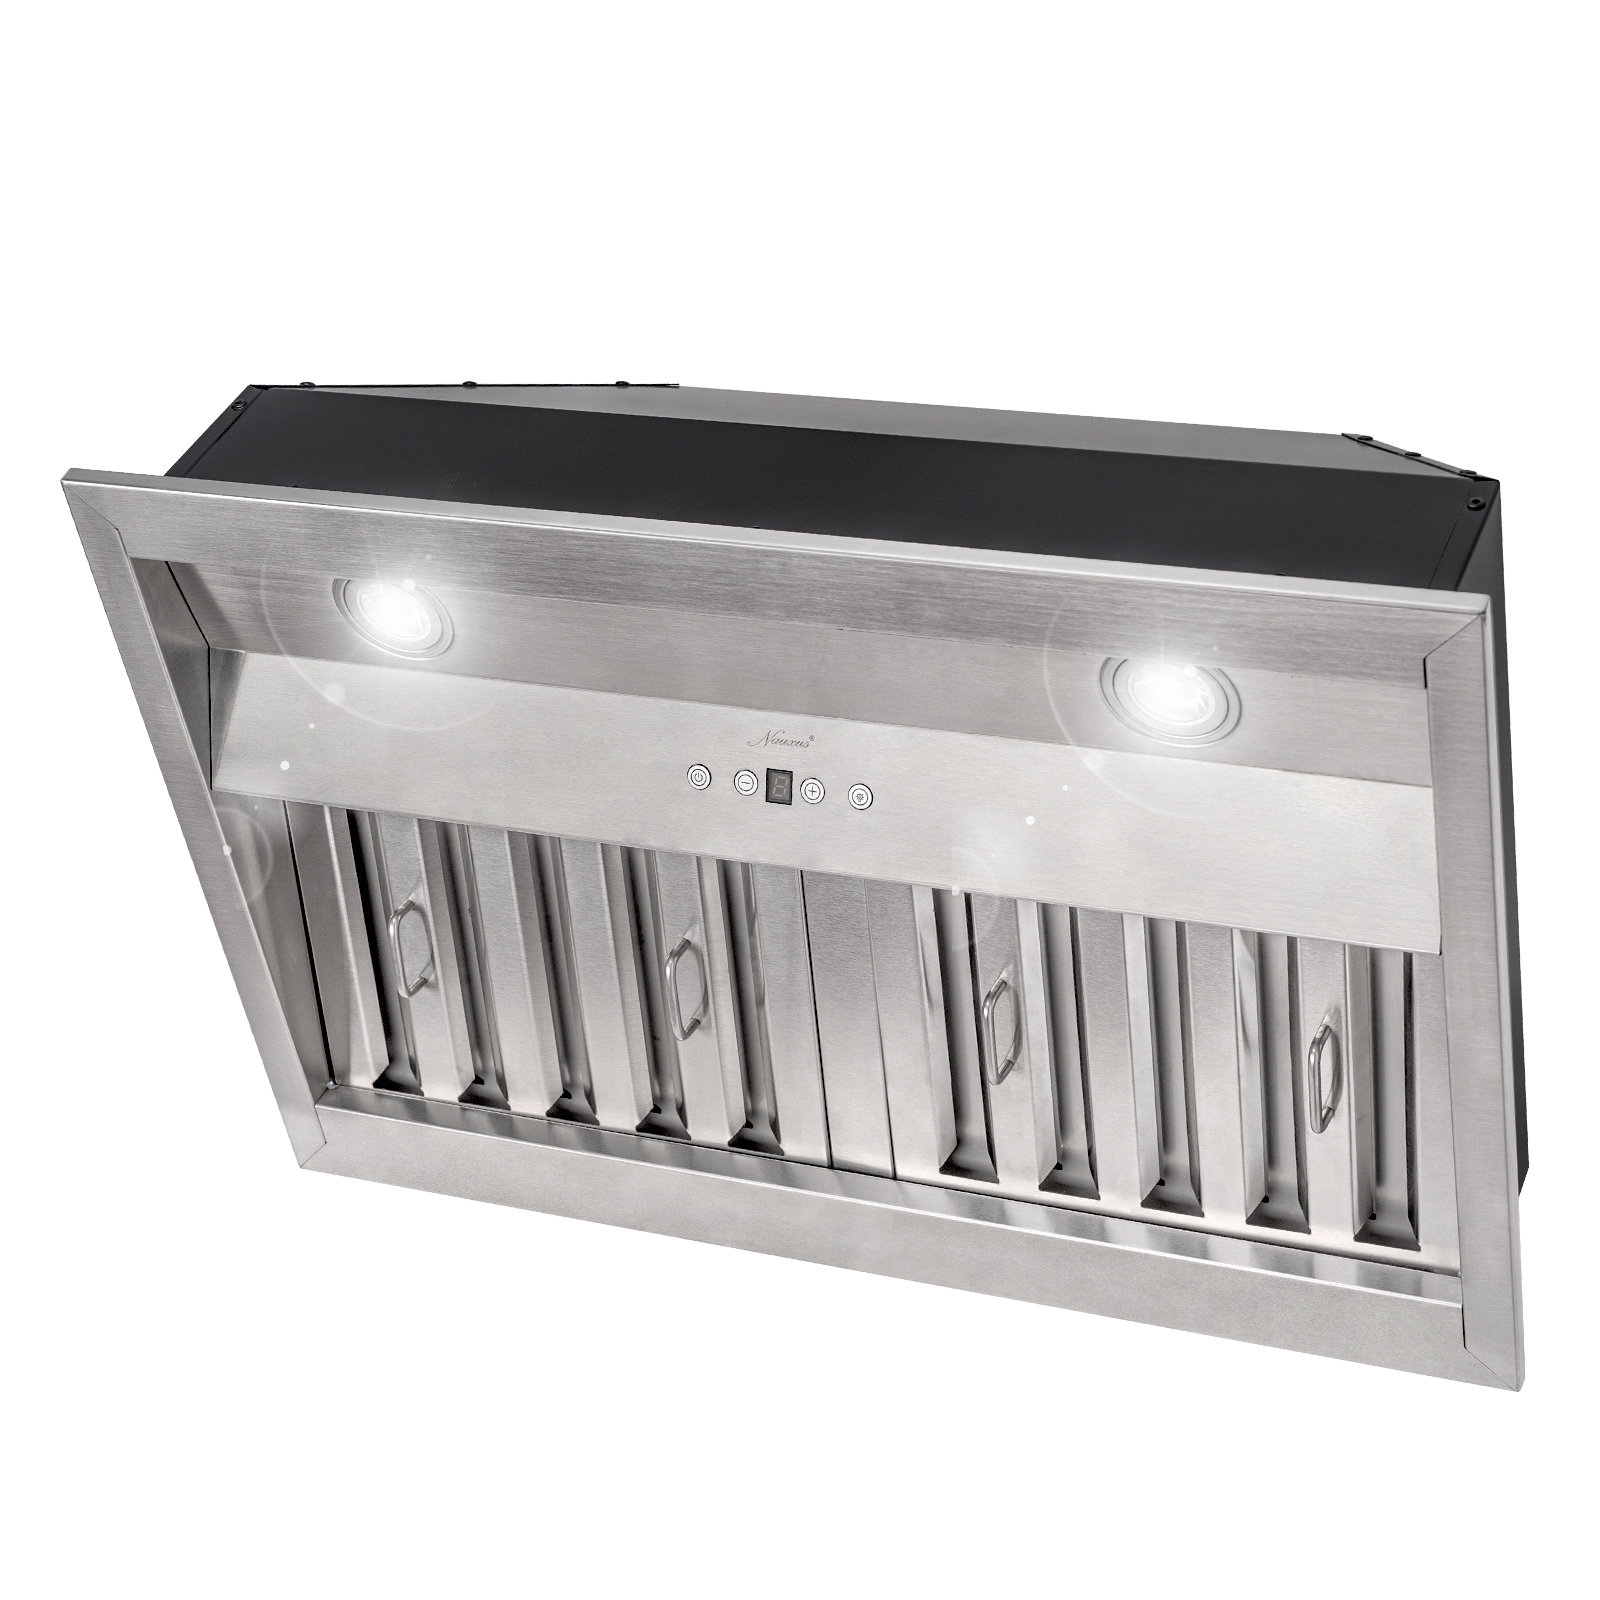 Range Hood Insert/Built-in 36 inch,Ultra Quiet Powerful Vent Hood with LED  Lights, 3 Speeds 600 CFM, Stainless Steel - Akicon